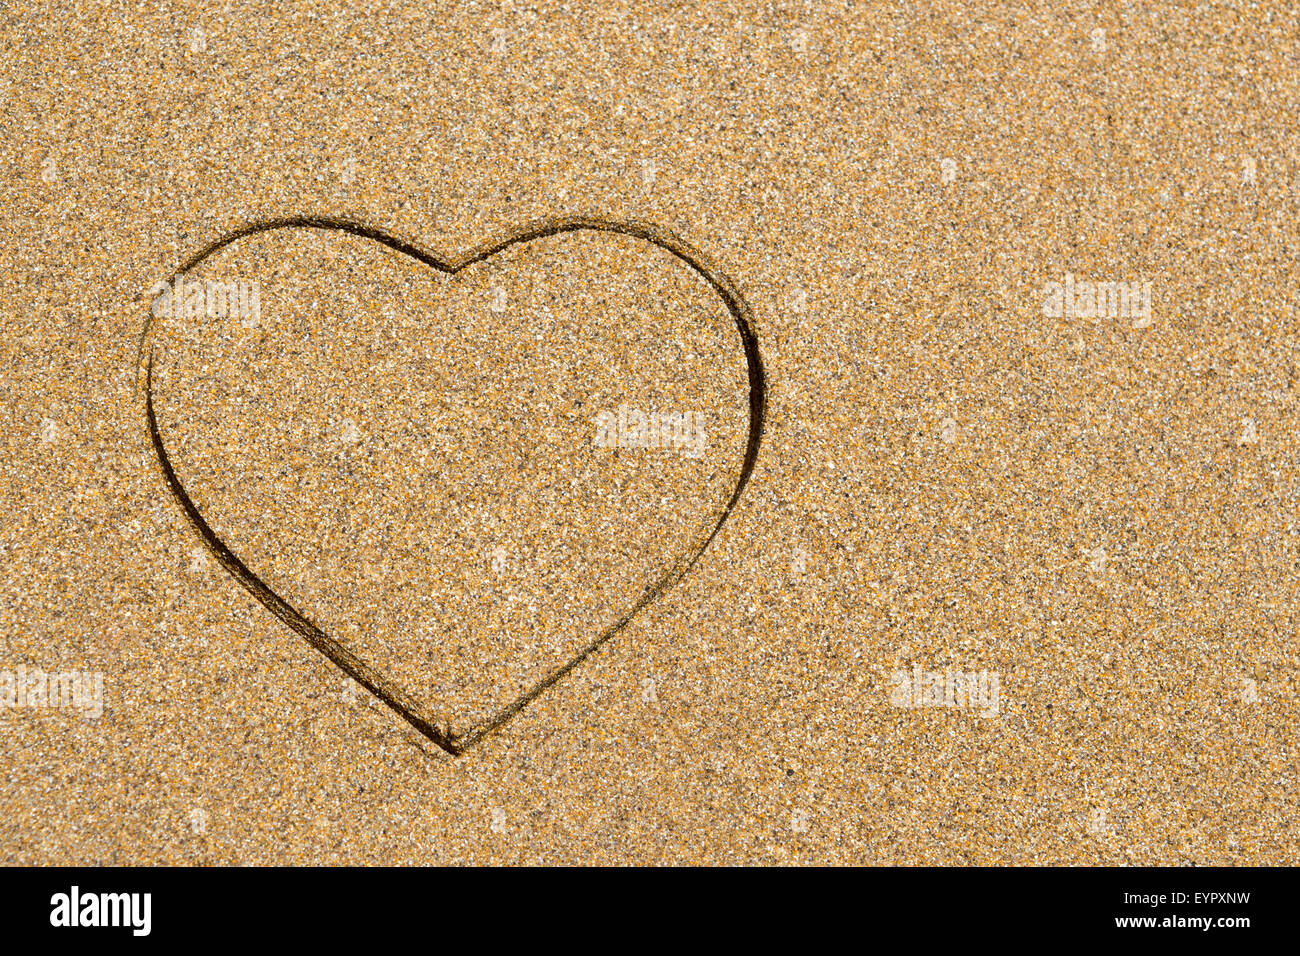 Heart shape engraved in a wet sandy beach. Summer vacation background with copyspace Stock Photo